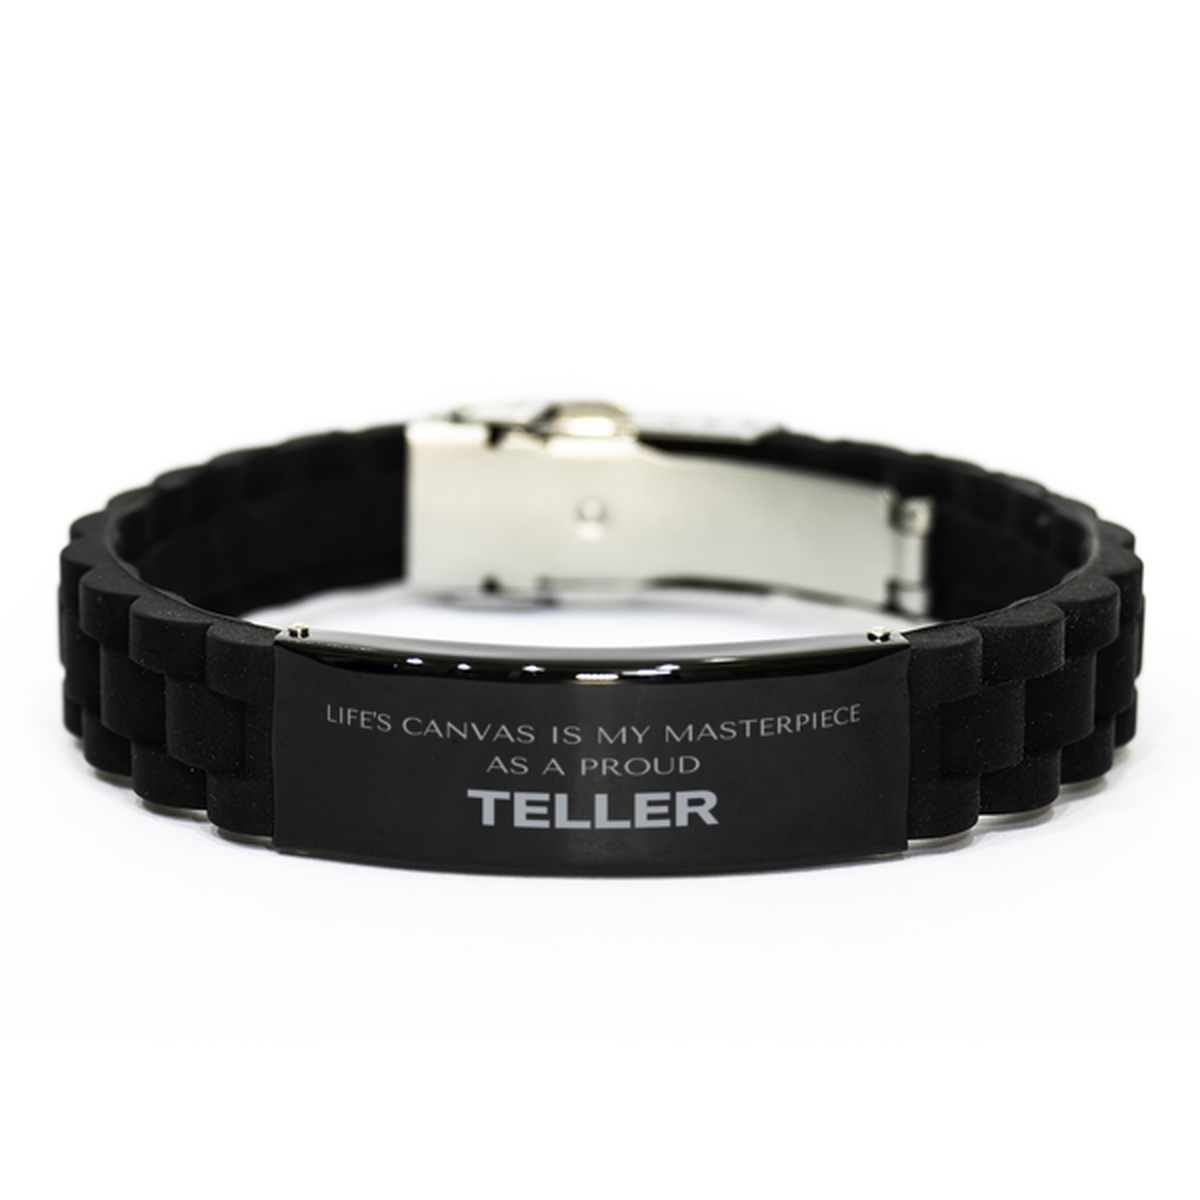 Proud Teller Gifts, Life's canvas is my masterpiece, Epic Birthday Christmas Unique Black Glidelock Clasp Bracelet For Teller, Coworkers, Men, Women, Friends